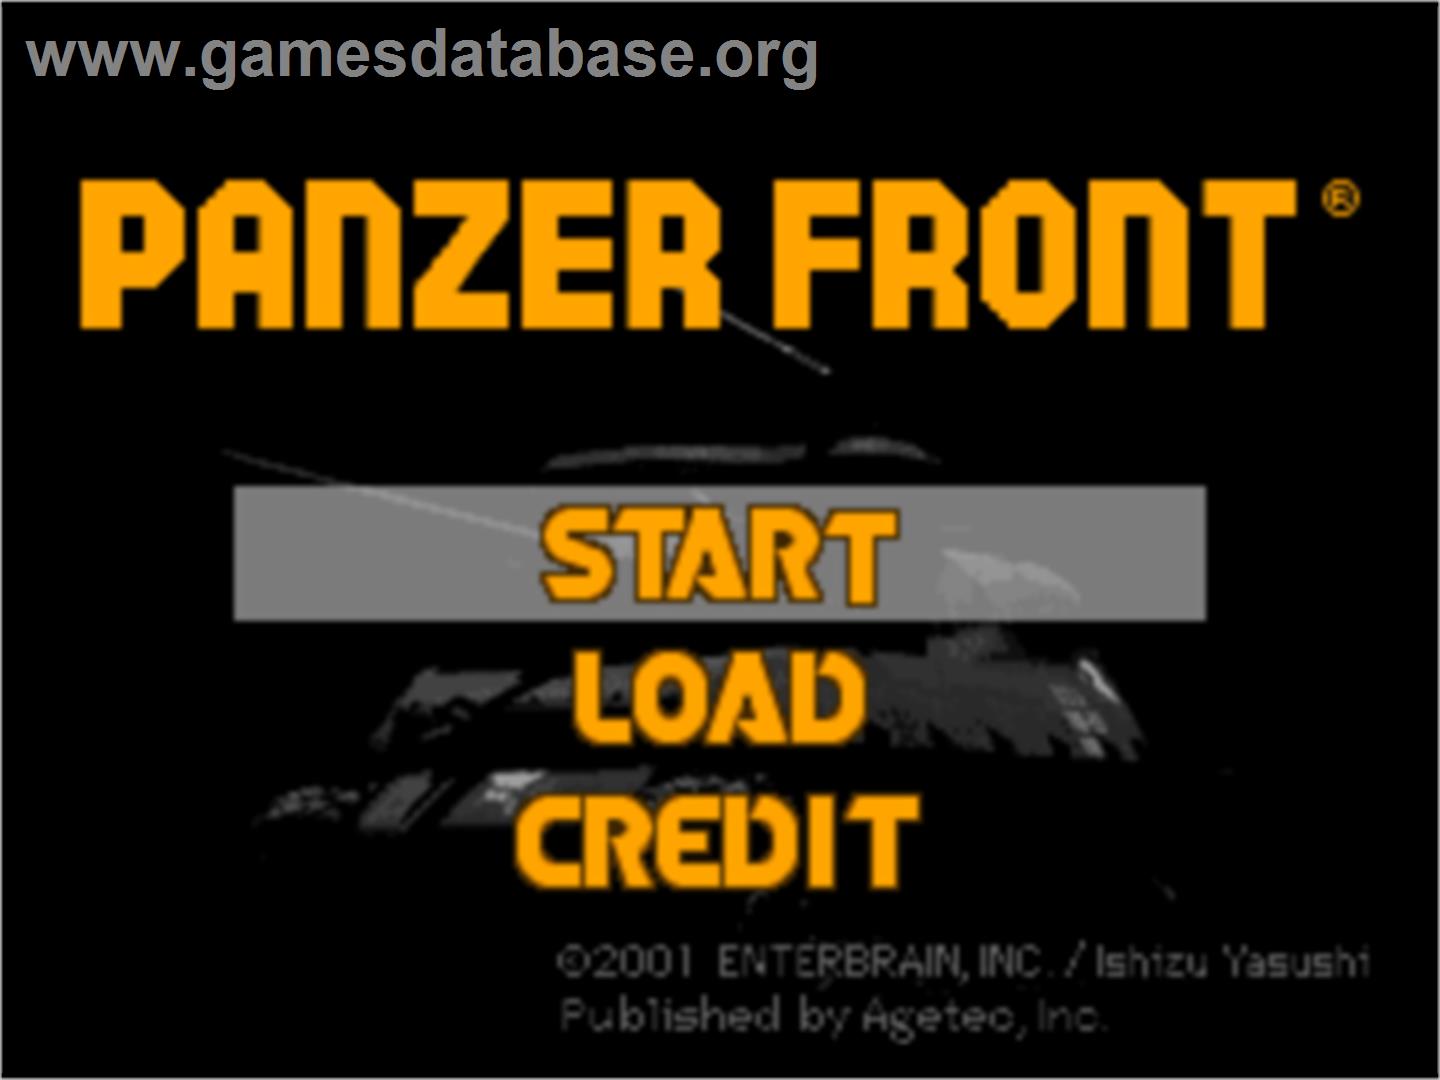 Panzer Front - Sony Playstation - Artwork - Title Screen